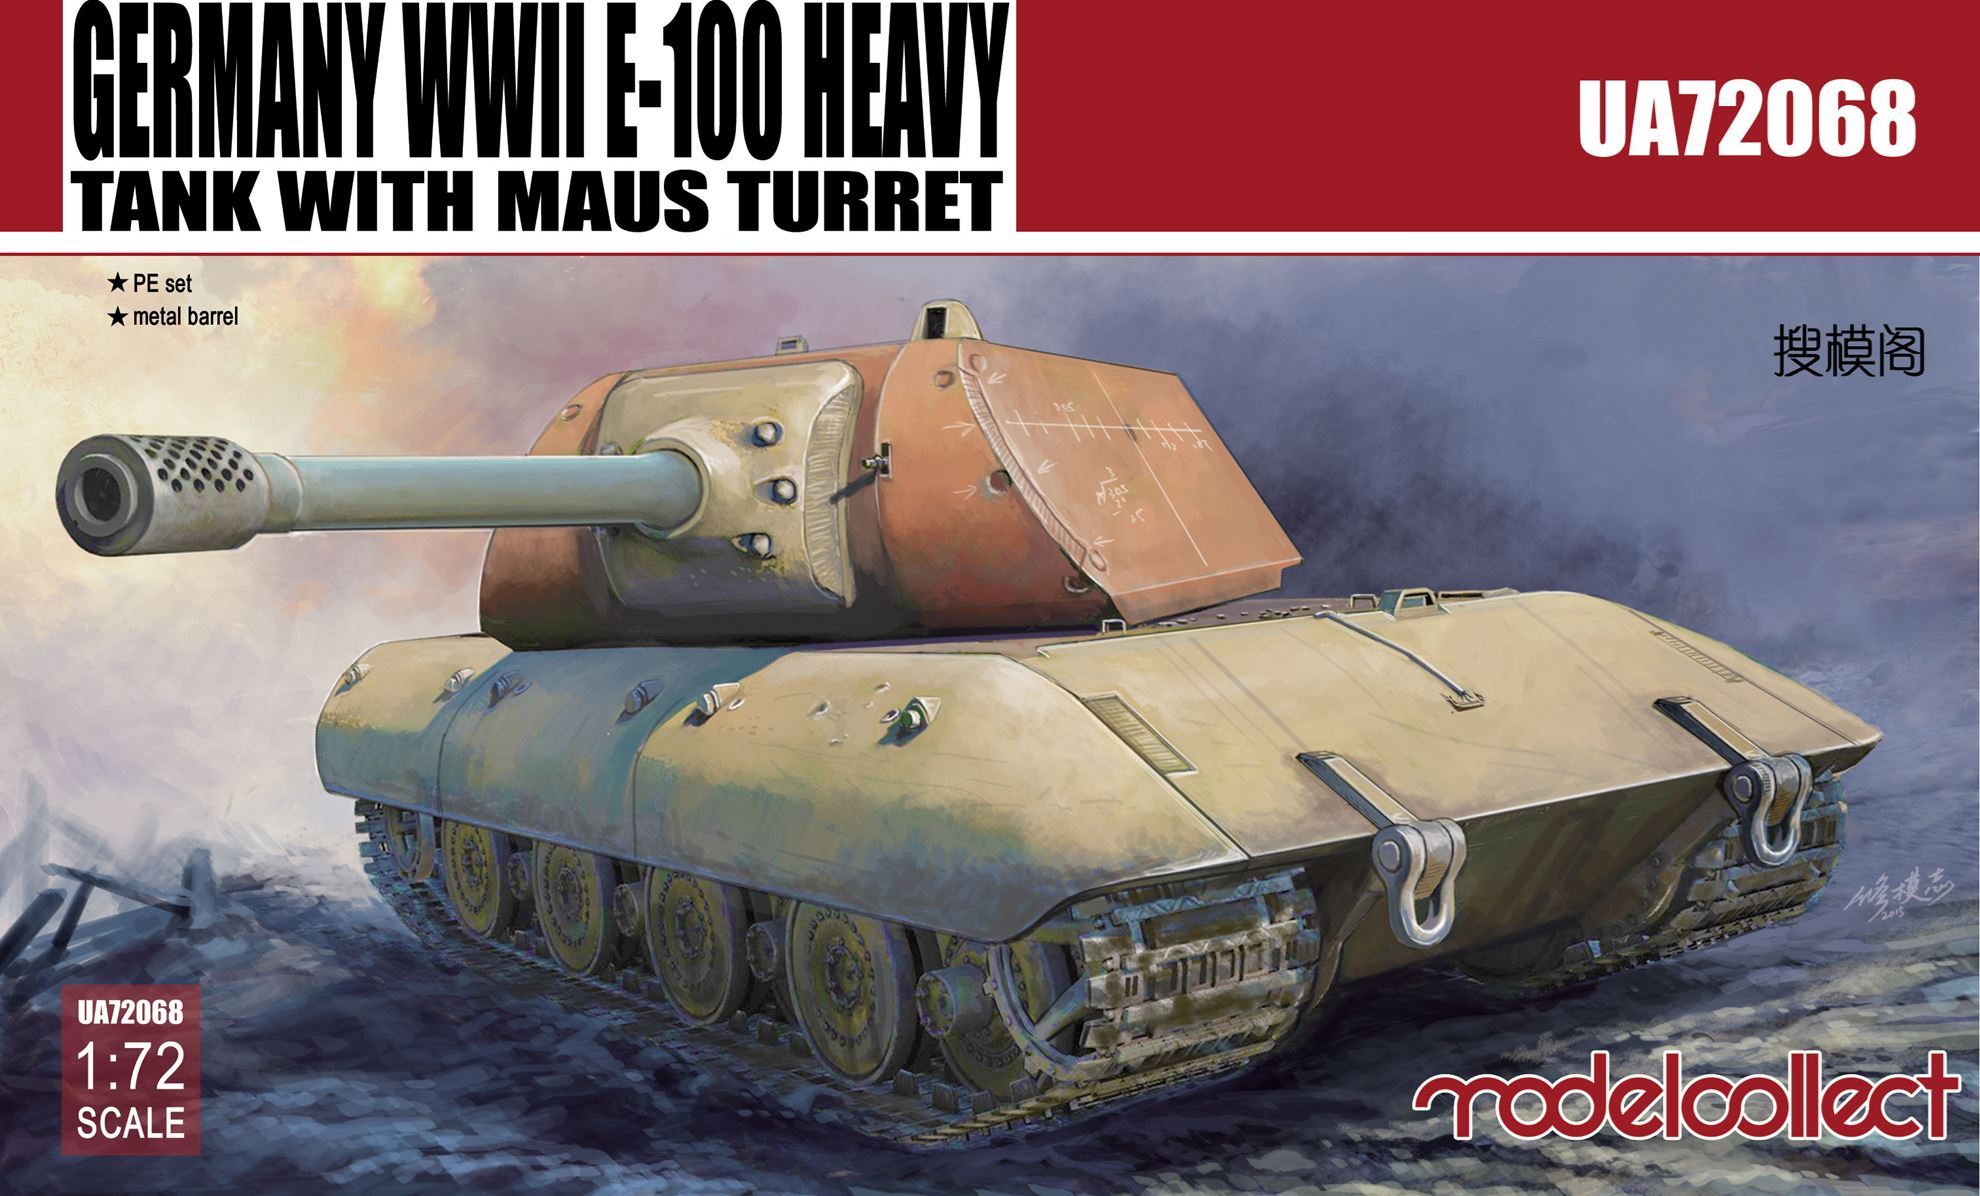 Modelcollect 1/72 Germany WWII E-100 Heavy Tank with Maus turret